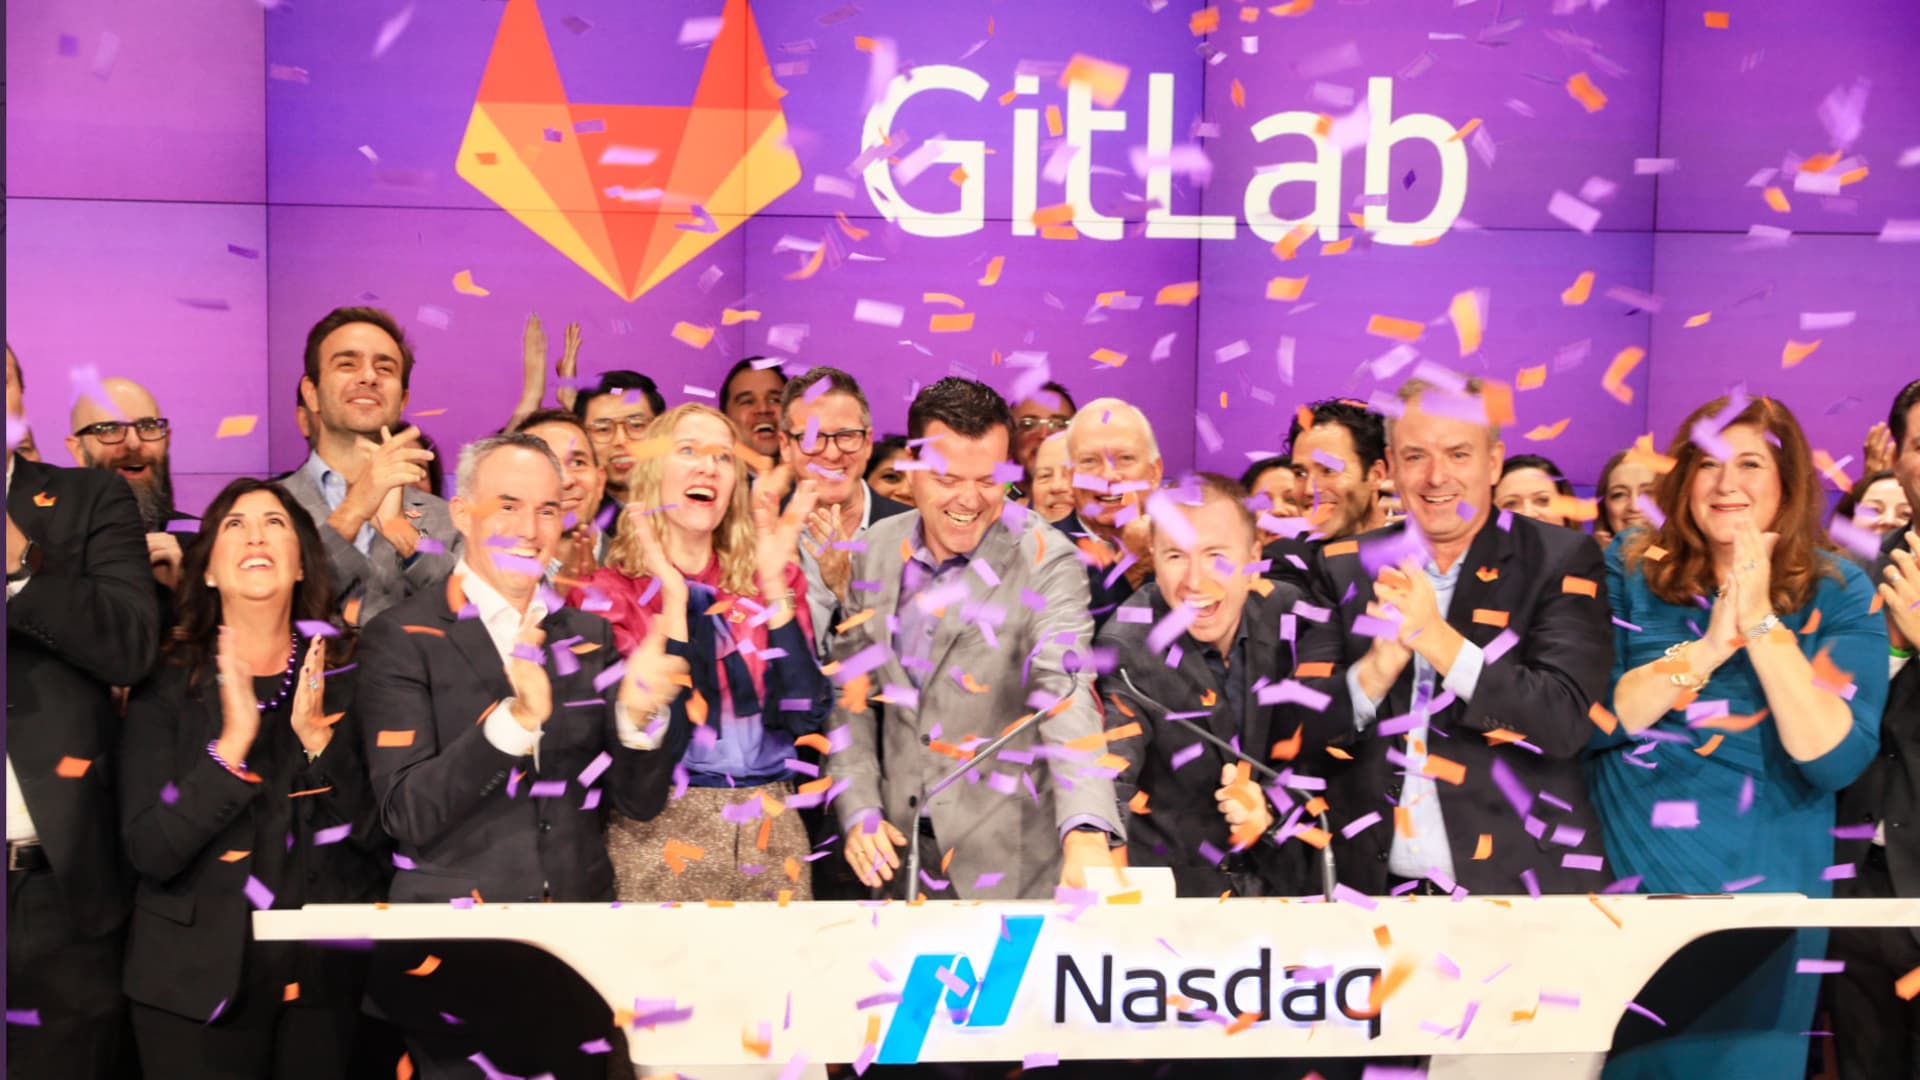 People celebrate the Gitlab IPO at the Nasdaq, October 14, 2021.